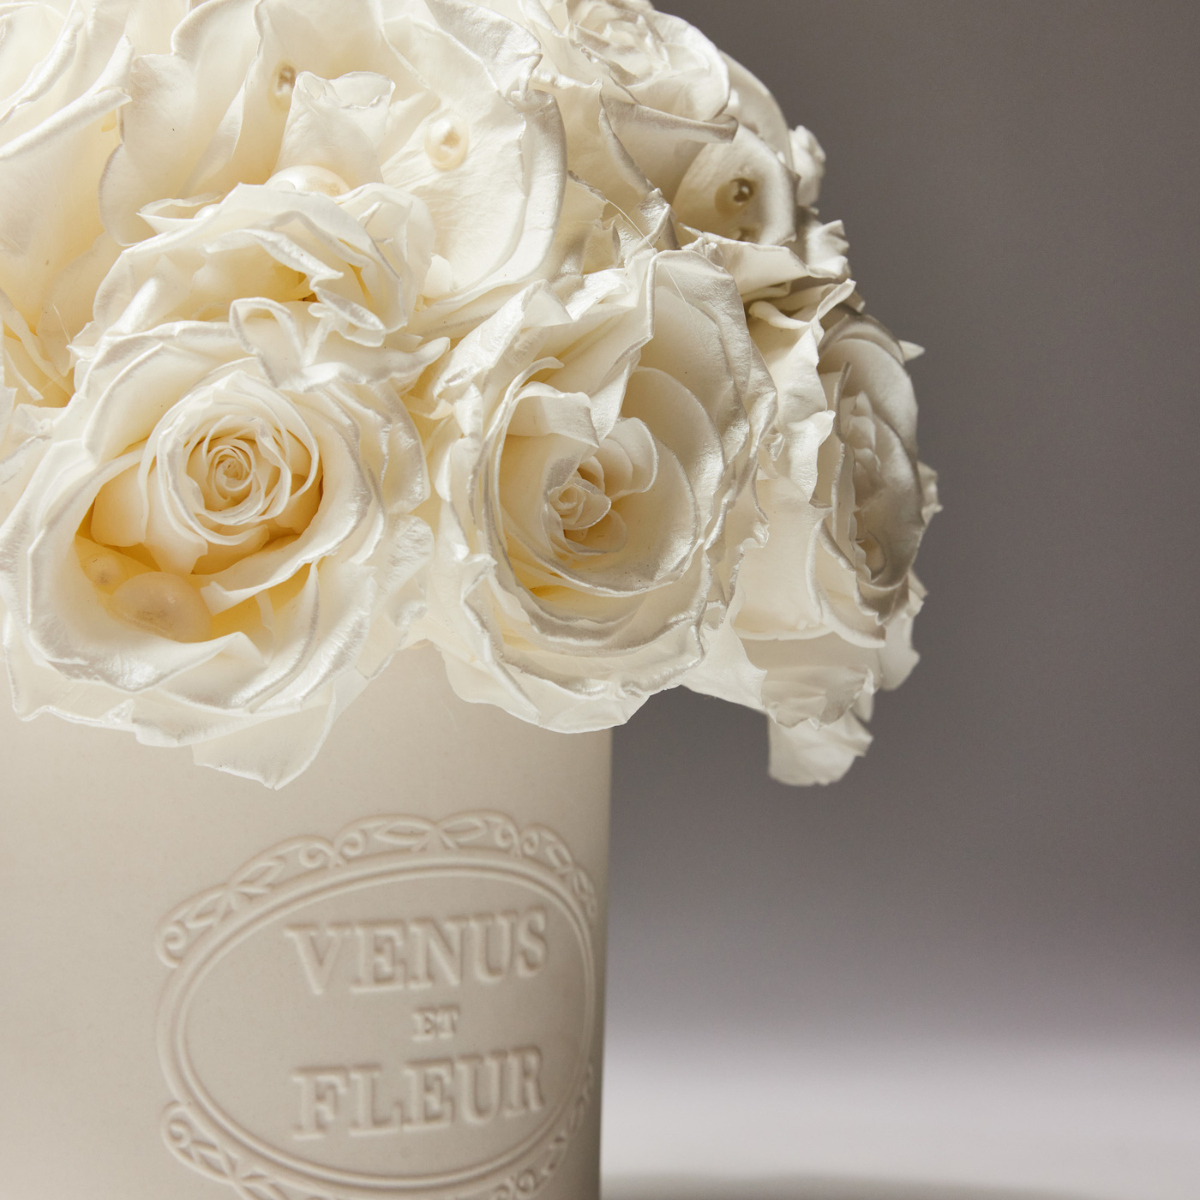 Our Pearlescent Fleura Porcelain Vase With Luxury Roses and Pearls